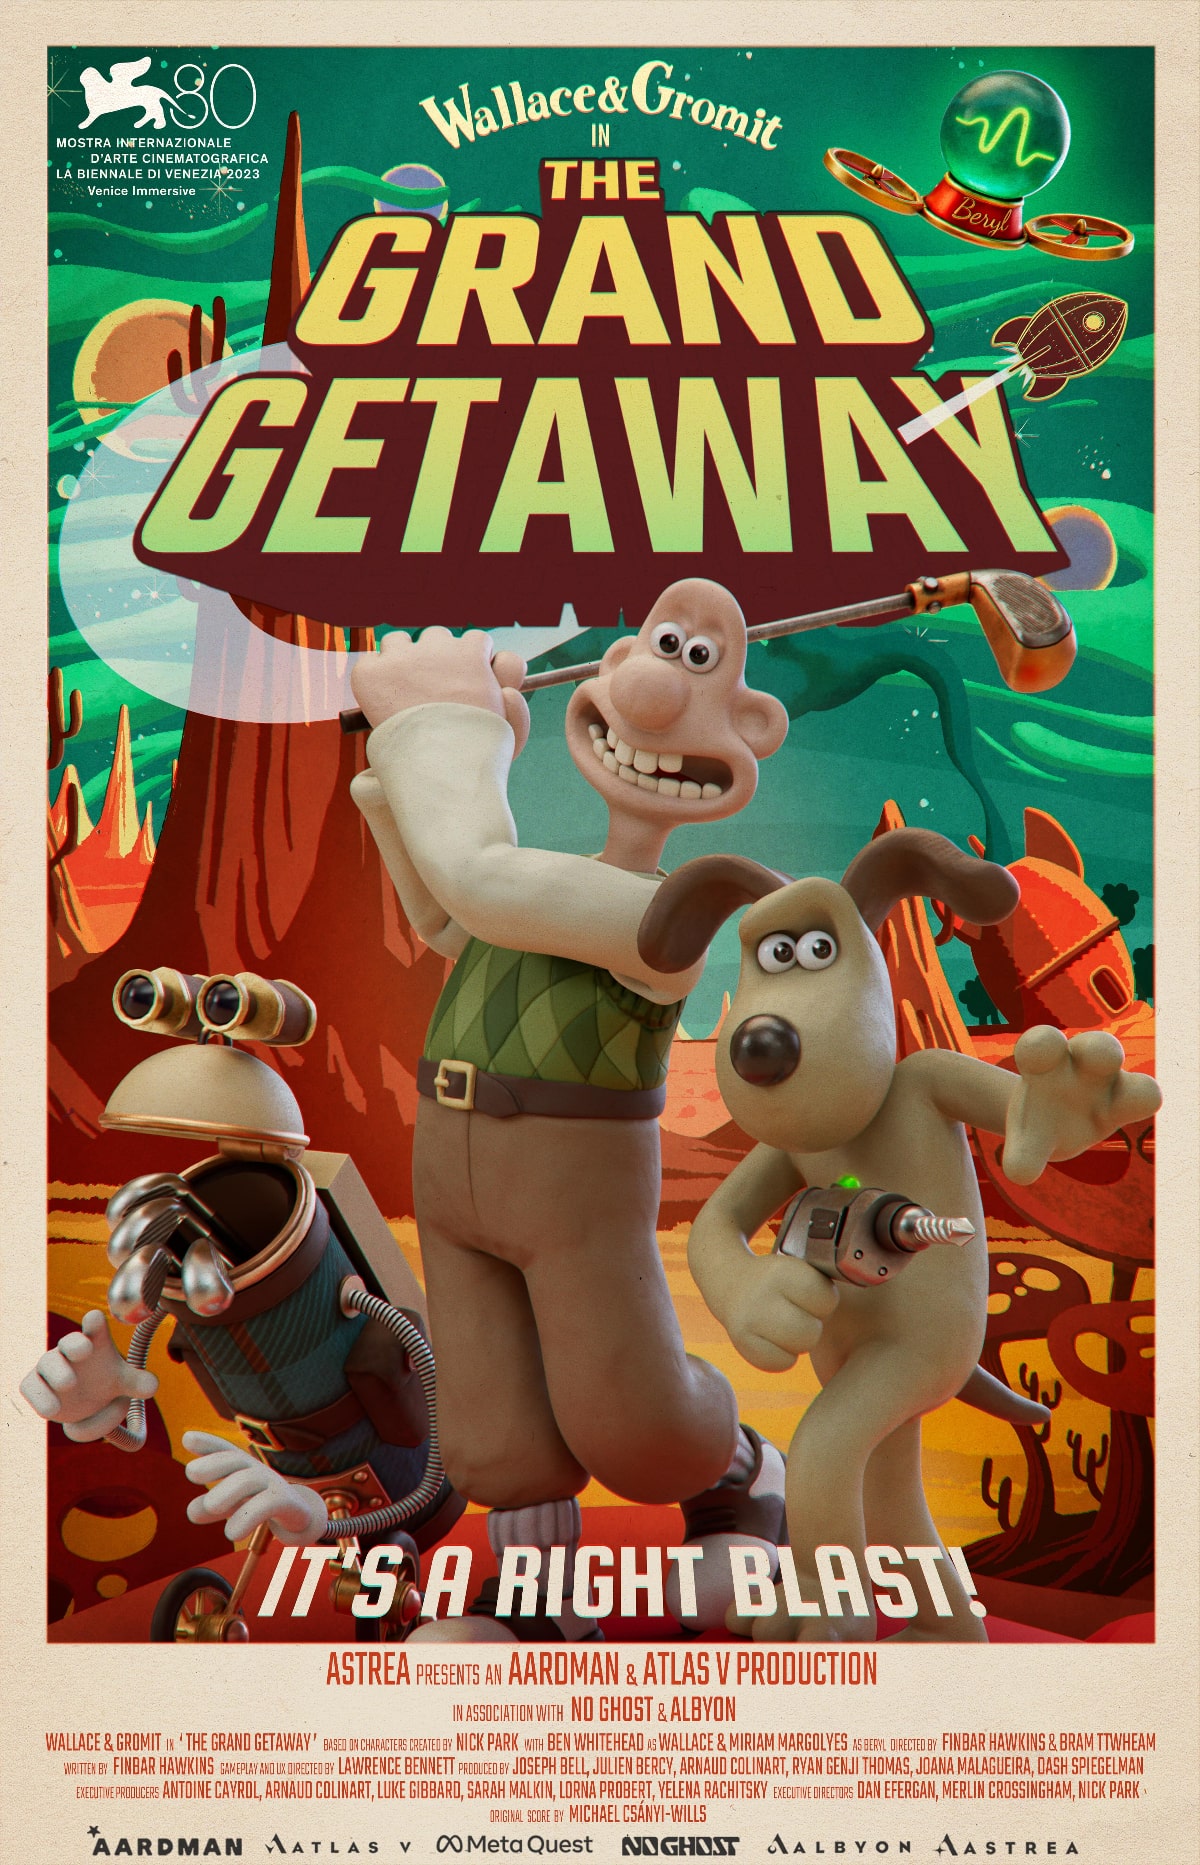 Poster ufficiale di Wallace & Gromit in the grand getaway. (Courtesy of Aardman)